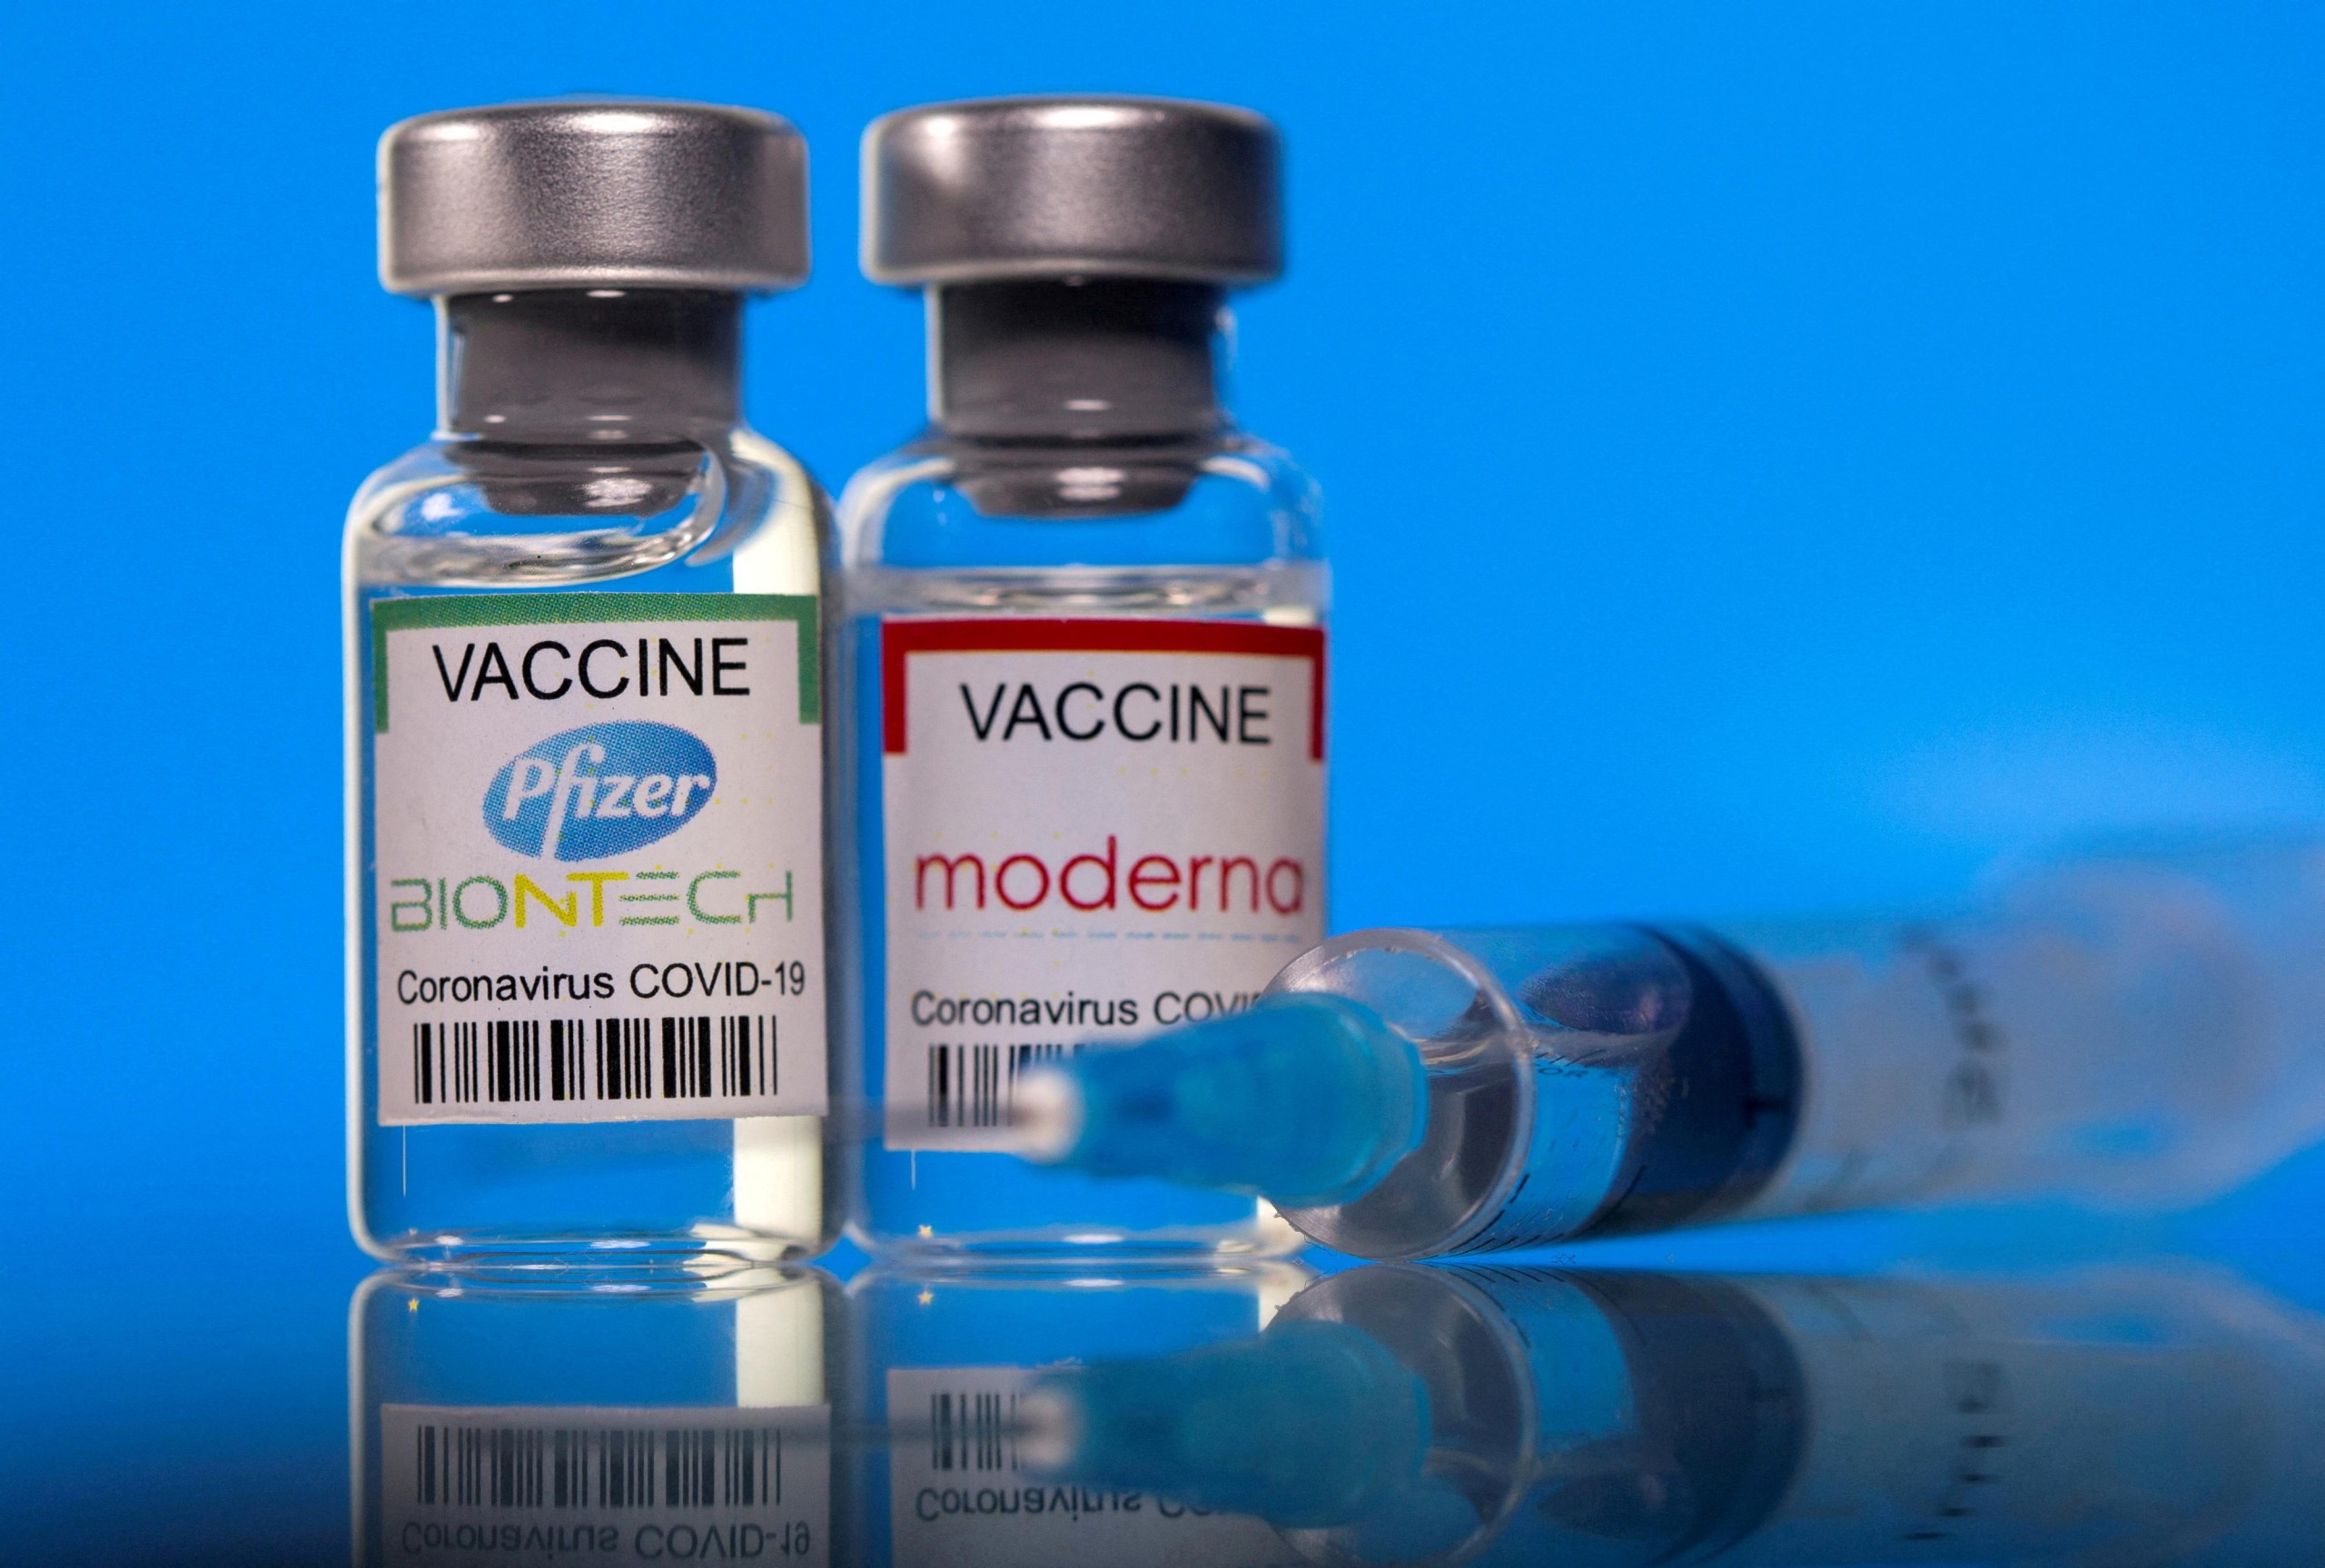 FILE PHOTO: Vials with Pfizer-BioNTech and Moderna coronavirus disease (COVID-19) vaccine labels are seen in this illustration picture taken March 19, 2021. REUTERS/Dado Ruvic/Illustration/File Photo Photo: DADO RUVIC/REUTERS